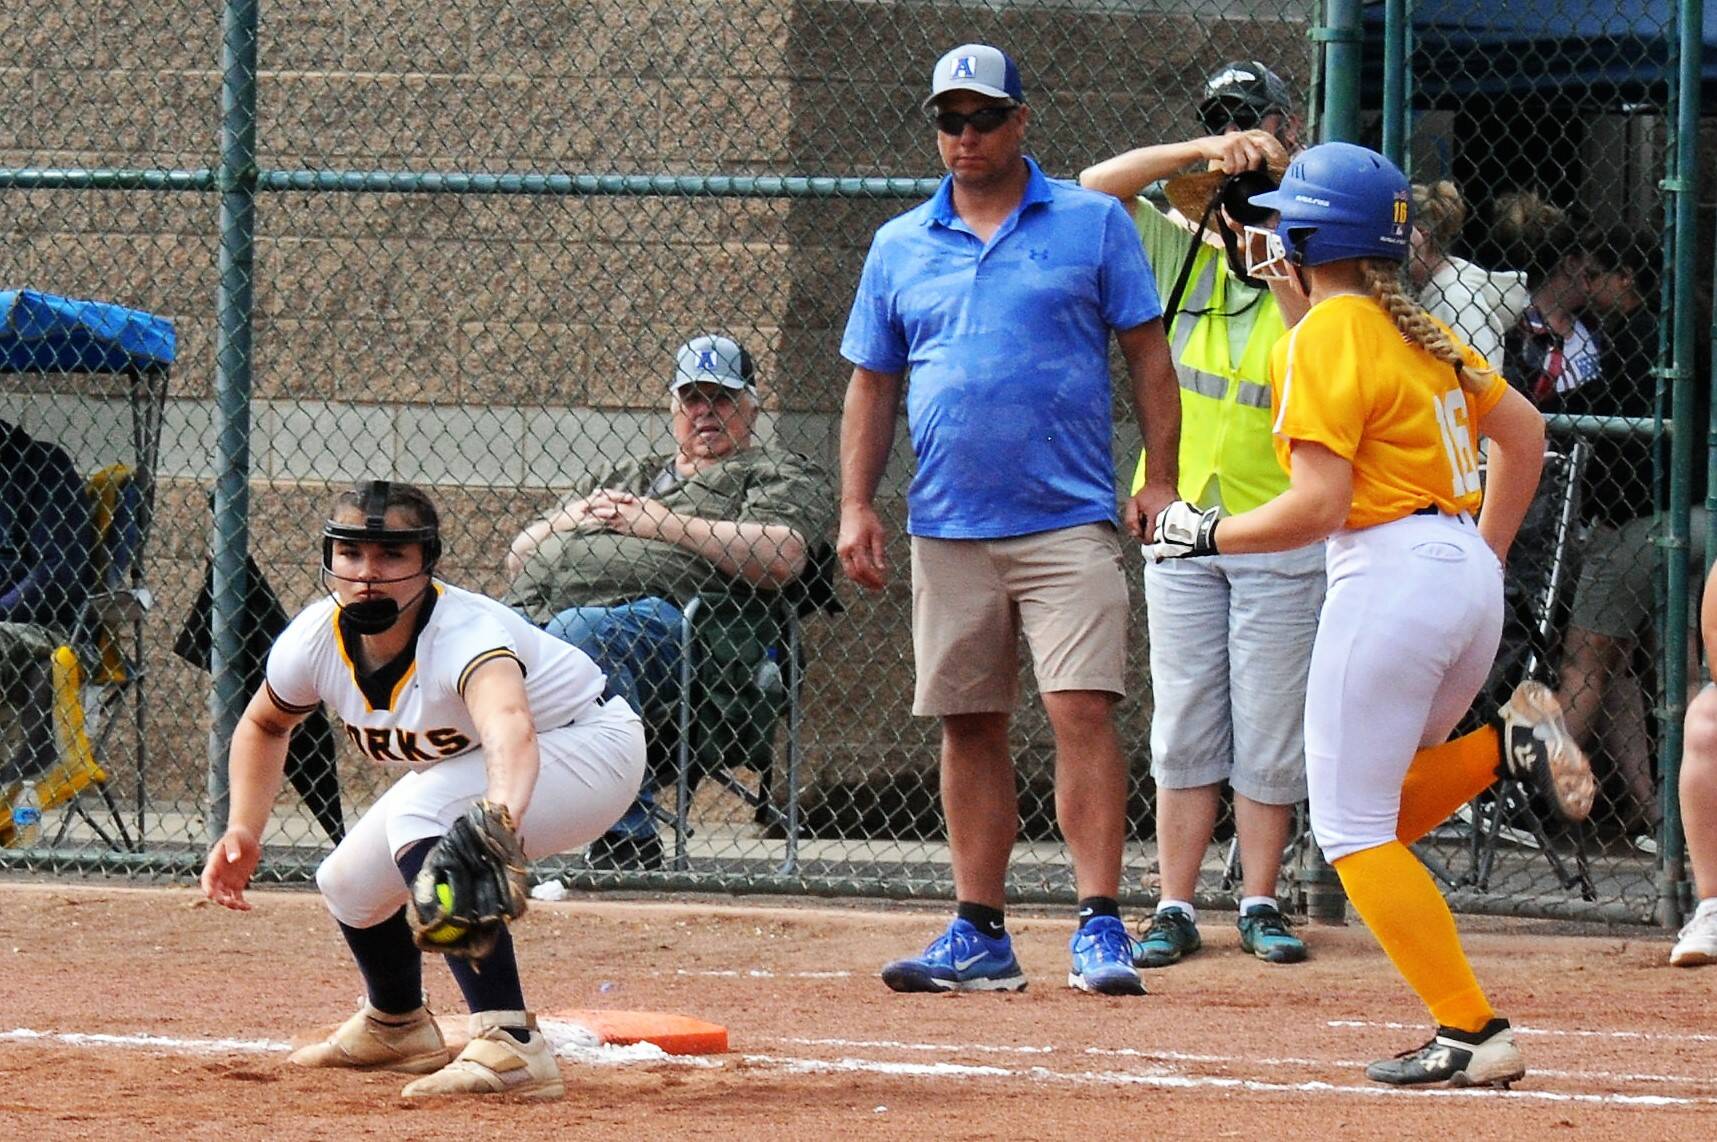 Forks first baseman Kaidence Rigby takes the throw from shortstop Kadie Wood for the out against Adna Saturday. Forks placed second in State after losing to the Pirates in the championship game. Photo by Lonie Archibald